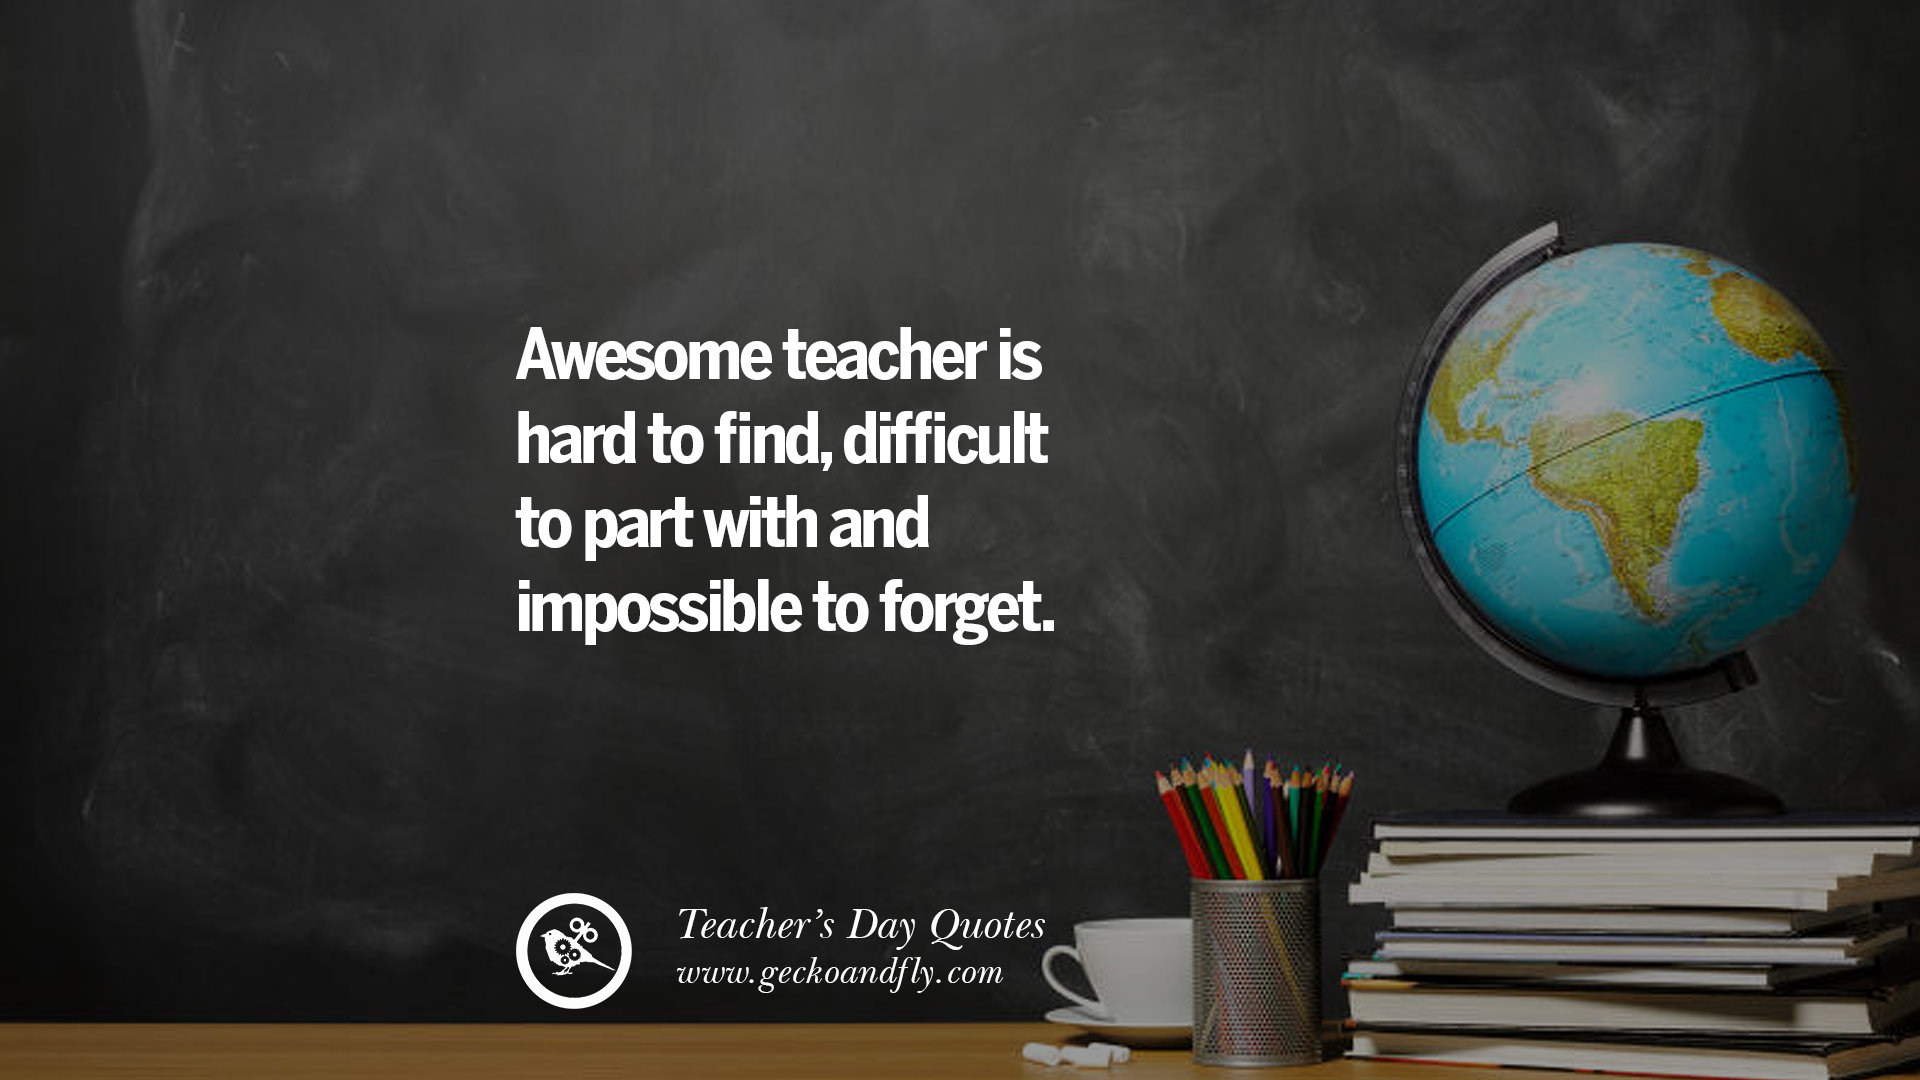 30 Happy Teachers' Day Quotes & Card Messages